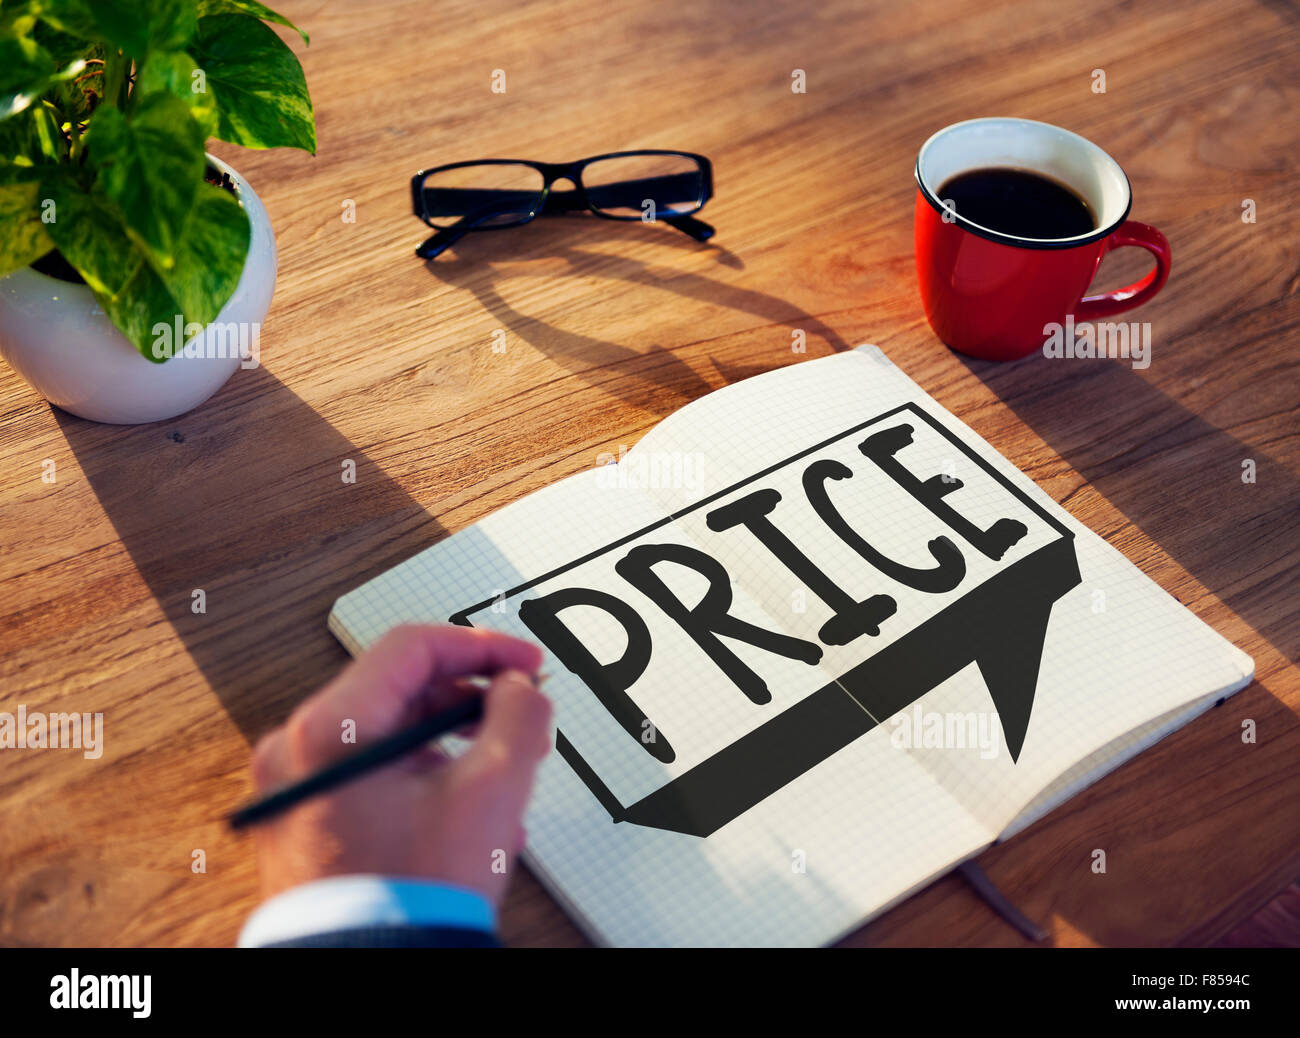 Price Cost Expense Money Rate Value Commerce Concept Stock Photo